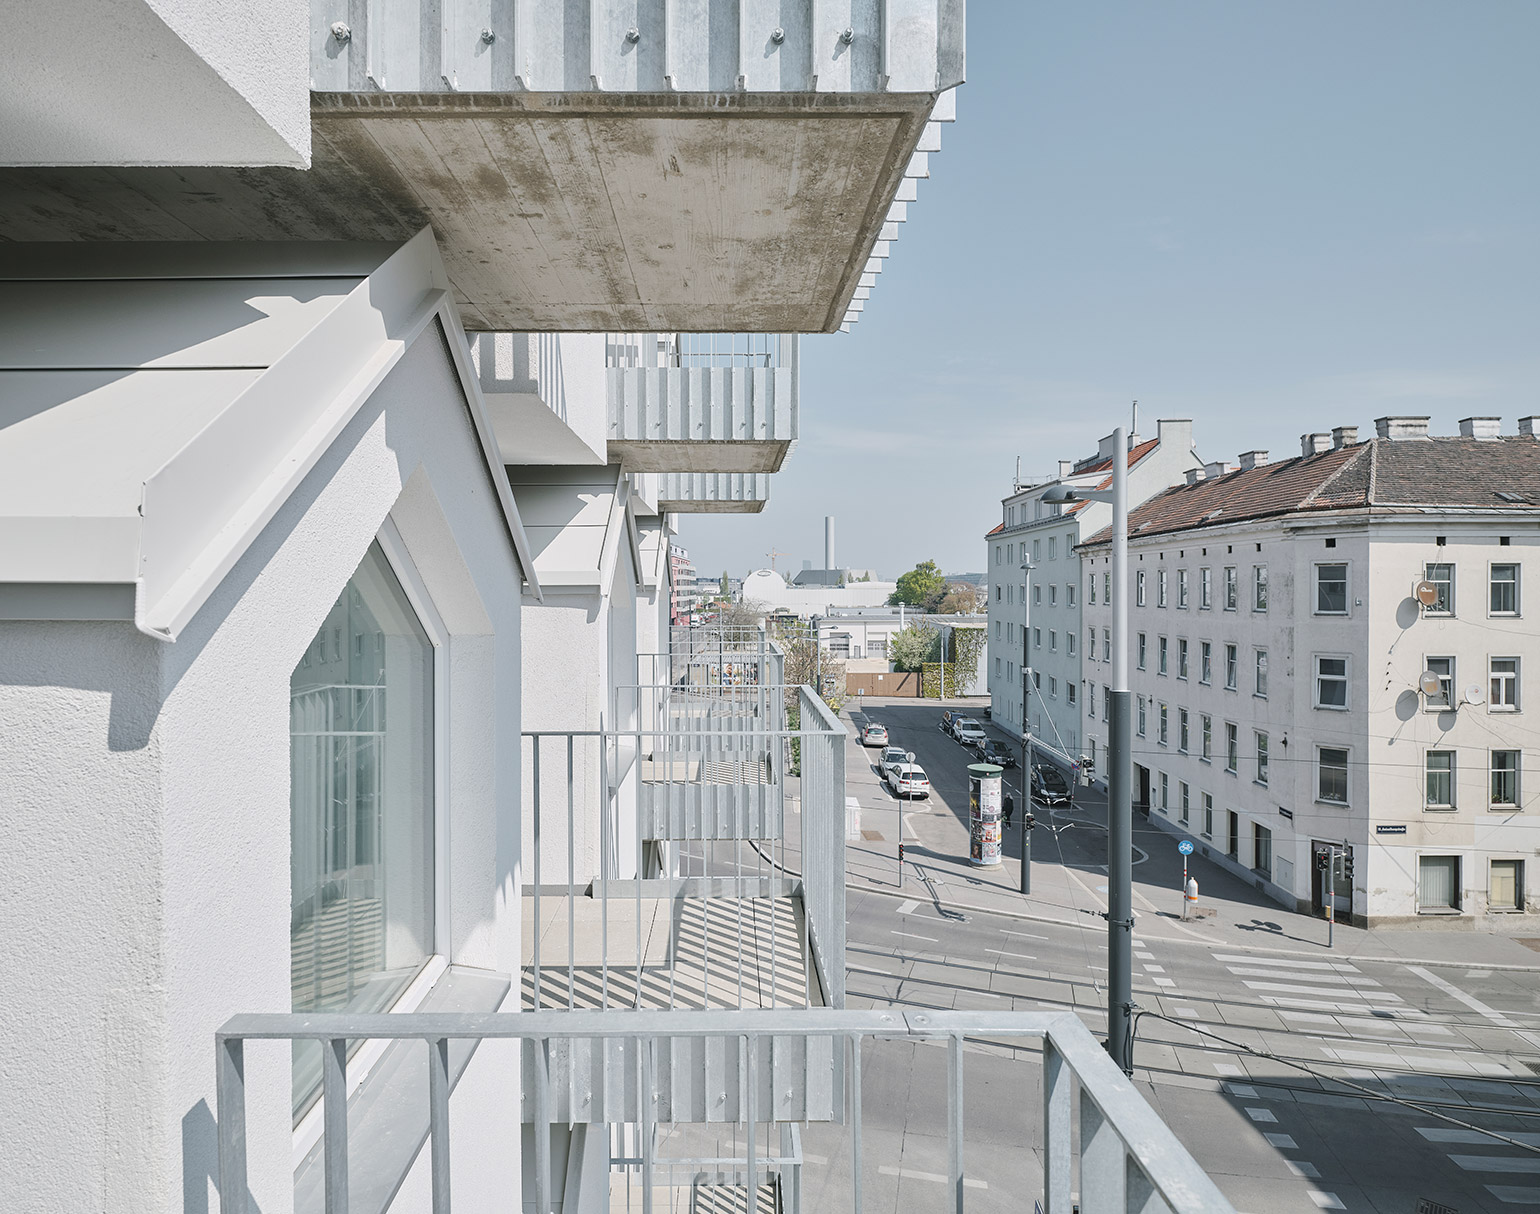 BFA x KLK Designed Residential Building in Vienna in the Form of Stacked Tiny Houses